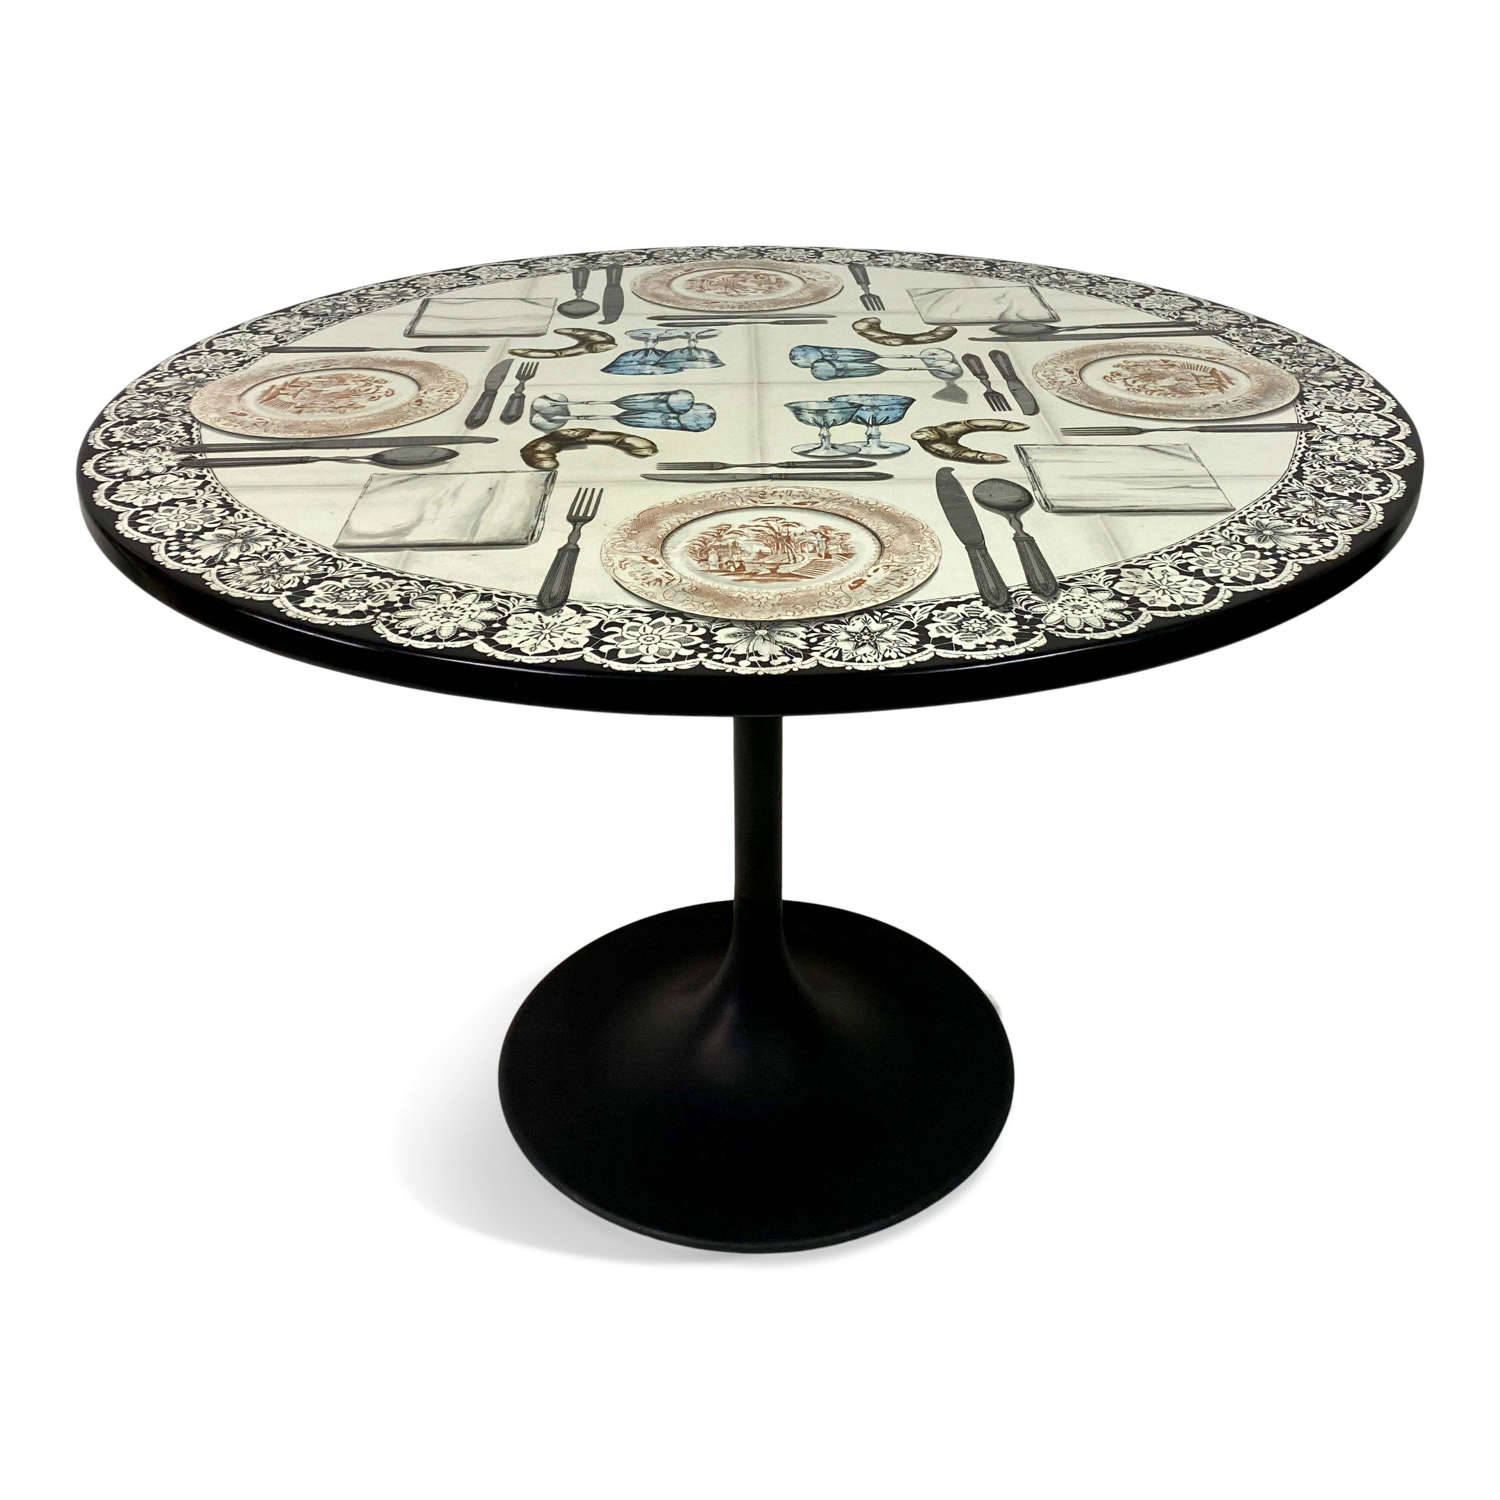 Vintage Fornasetti Tromp L'Oeil Dining or Centre Table